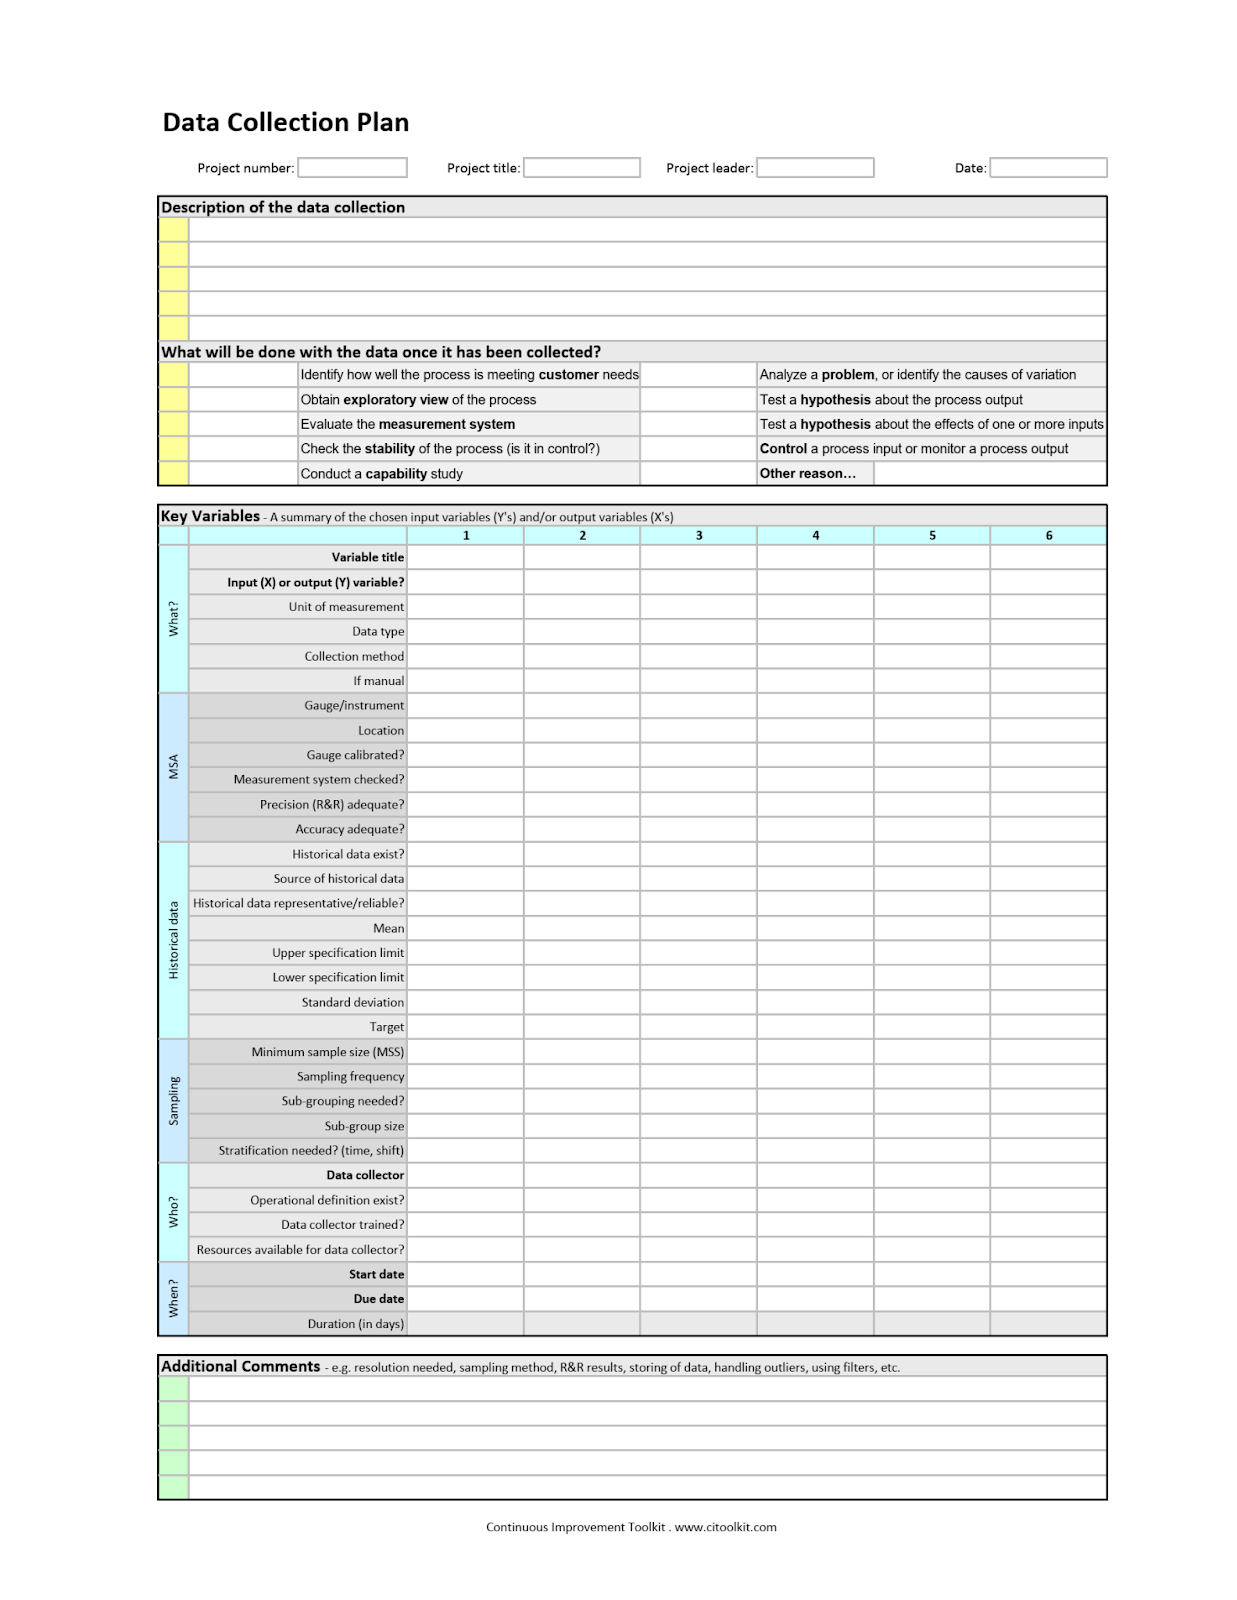 Generic data collection plan template.